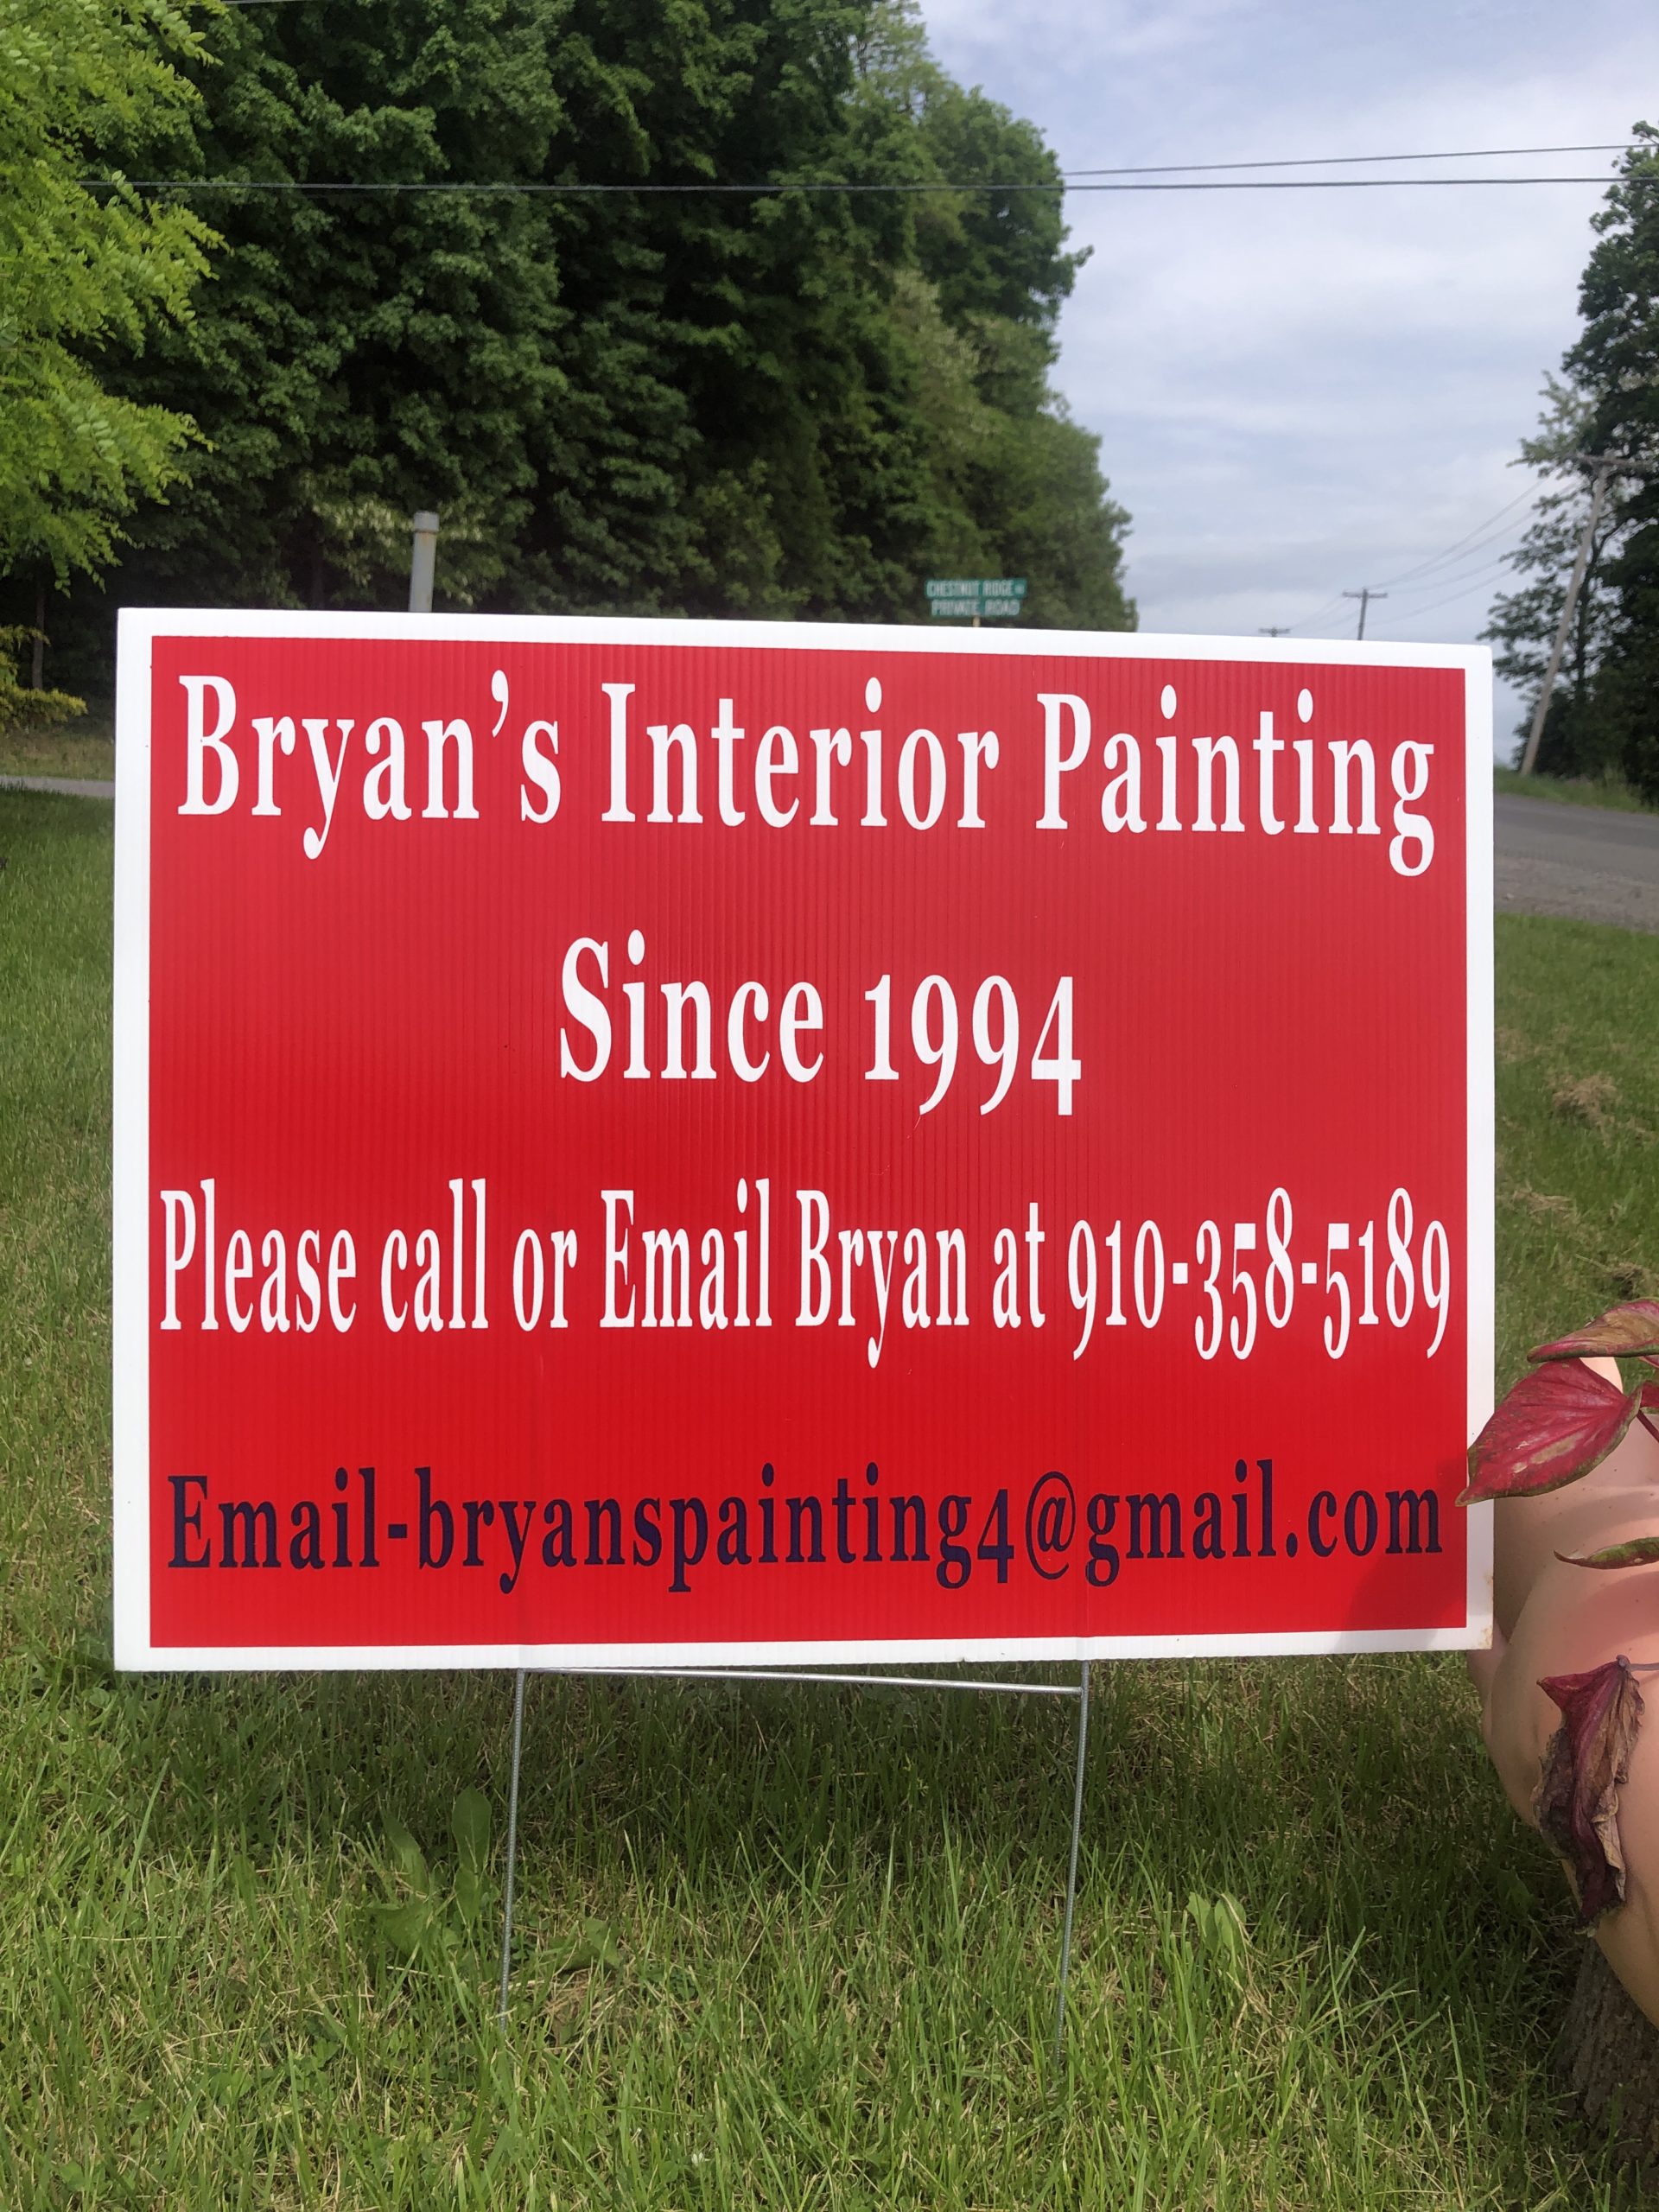 Bryan’s Interior Painting Since 1994